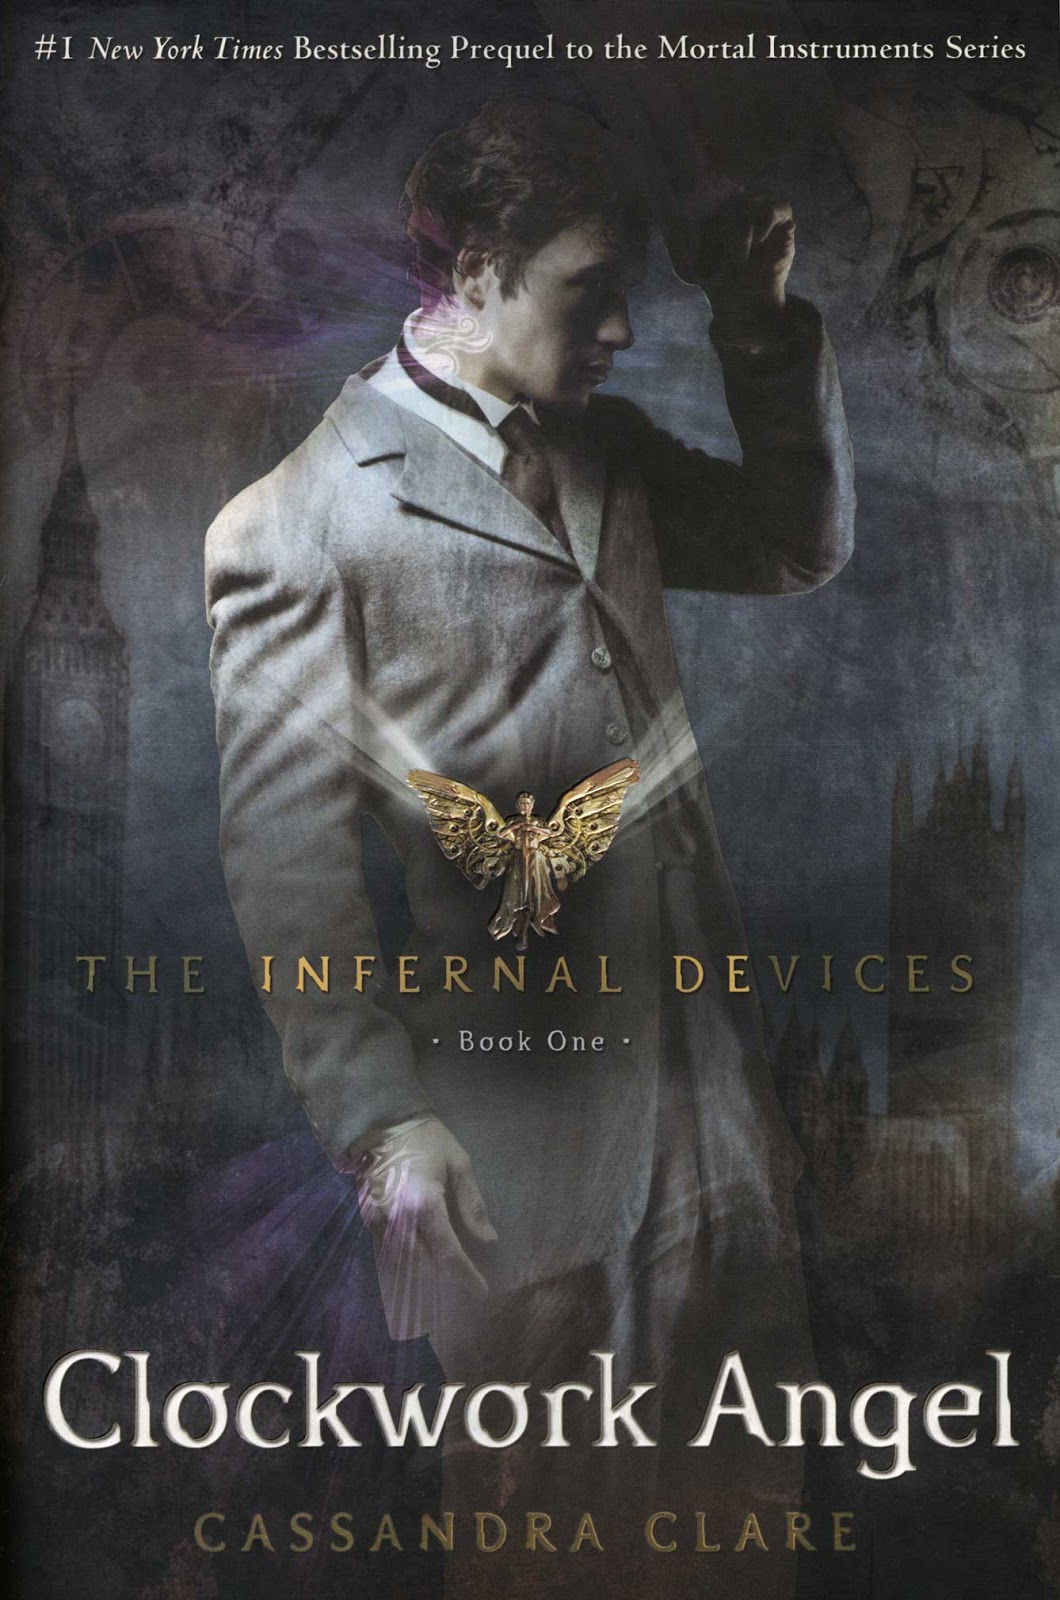 The infernal devices book one : clockwork angel